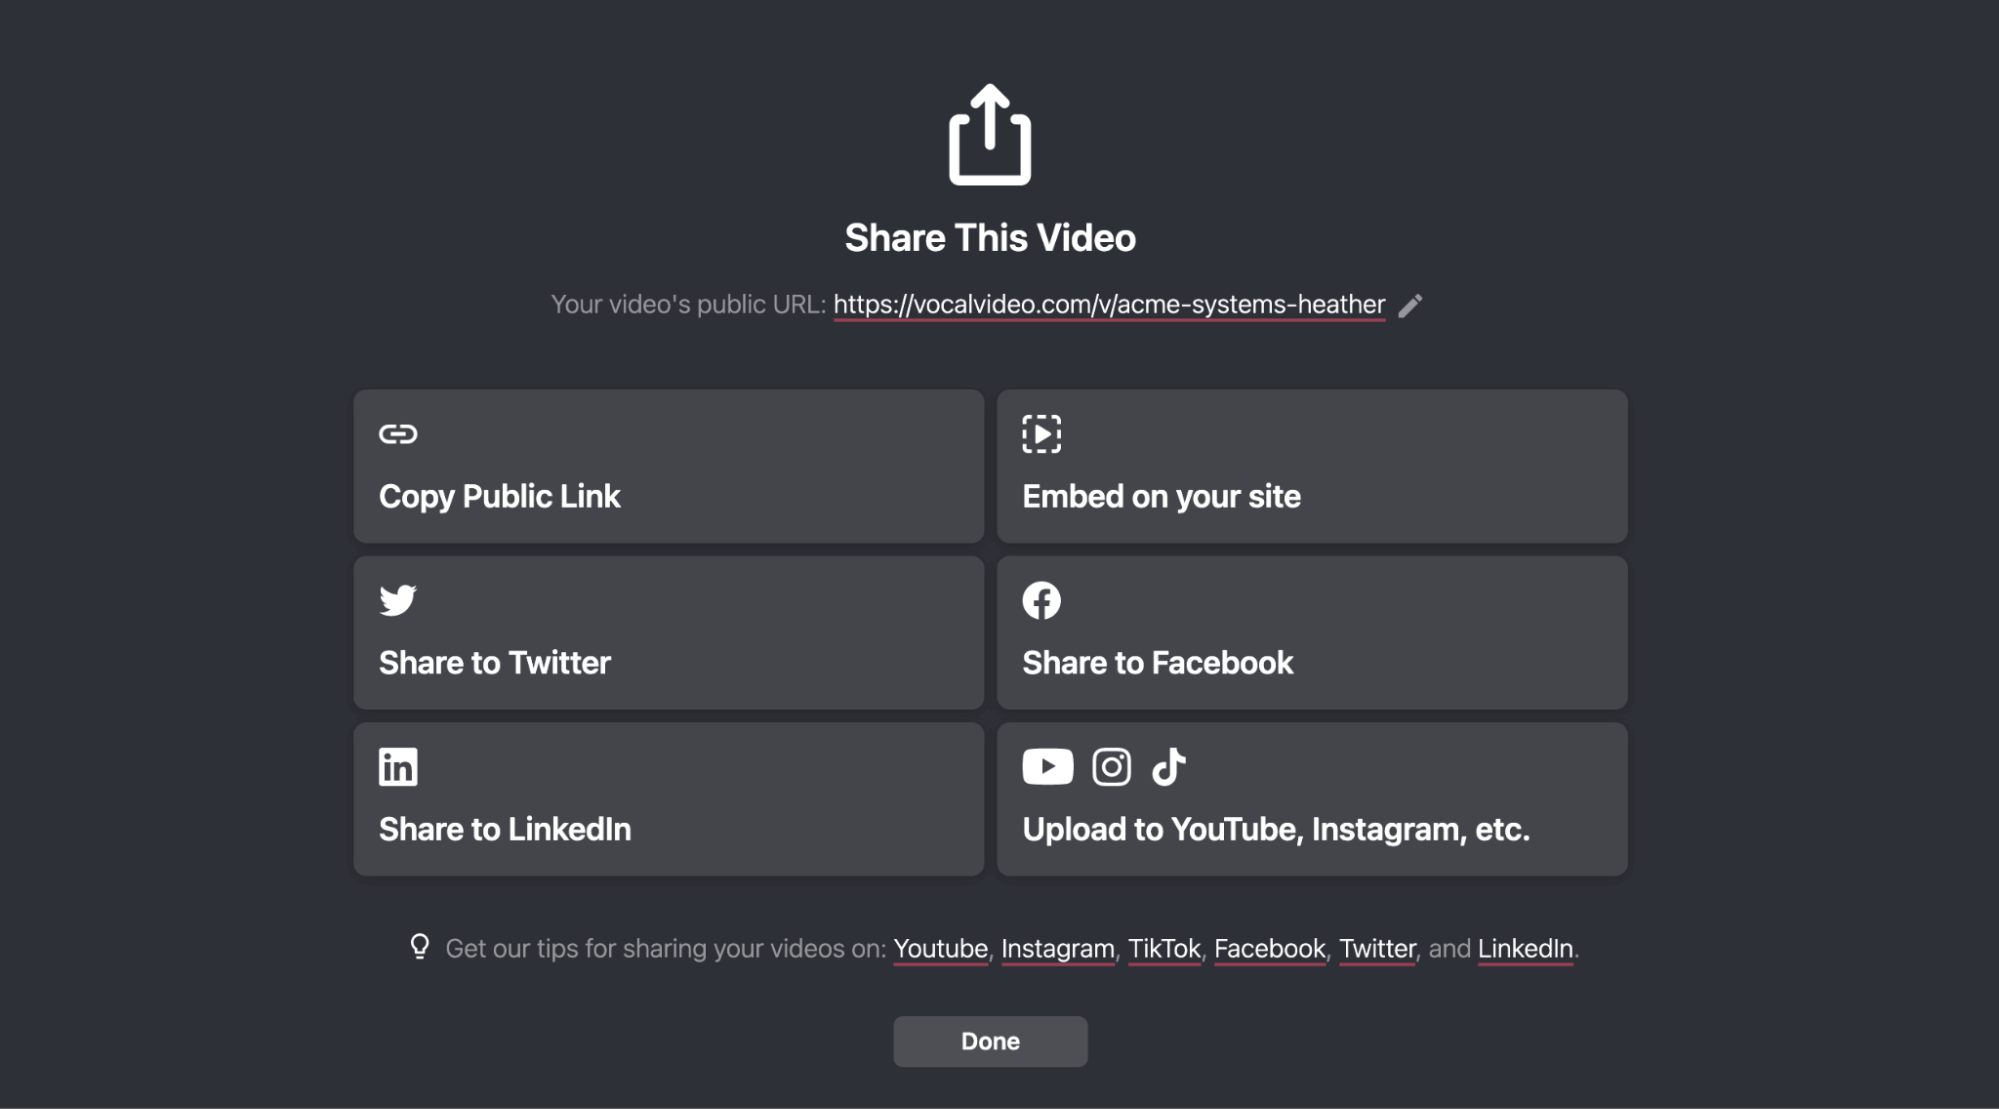 Share This Video: Your video's public URL, Copy link, Embed